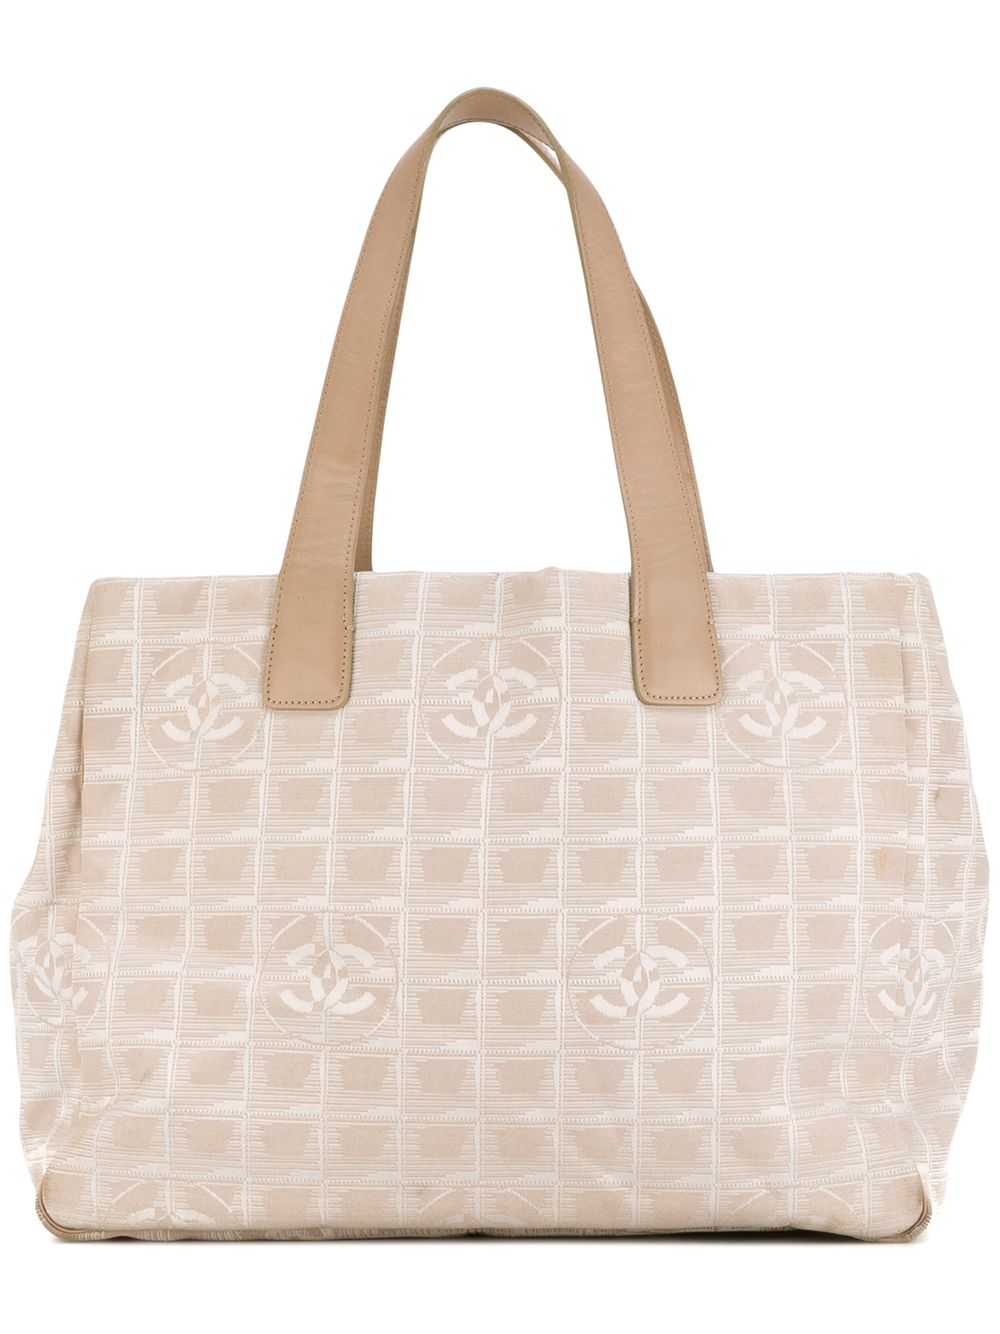 Pre-owned Chanel Executive Tote In Neutrals